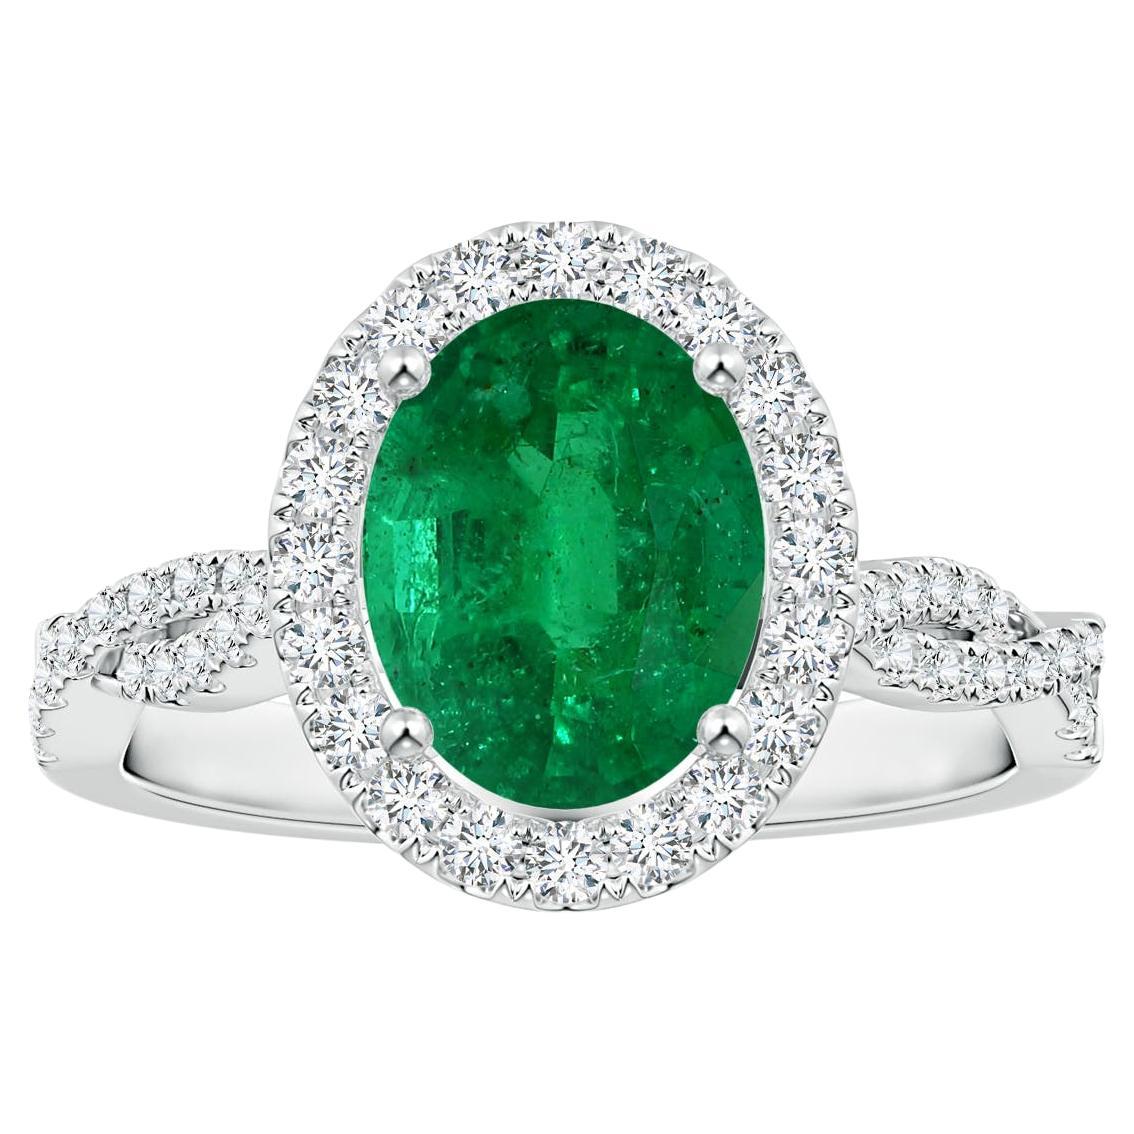 For Sale:  ANGARA GIA Certified Natural Emerald Halo Ring in White Gold with Diamond Shank